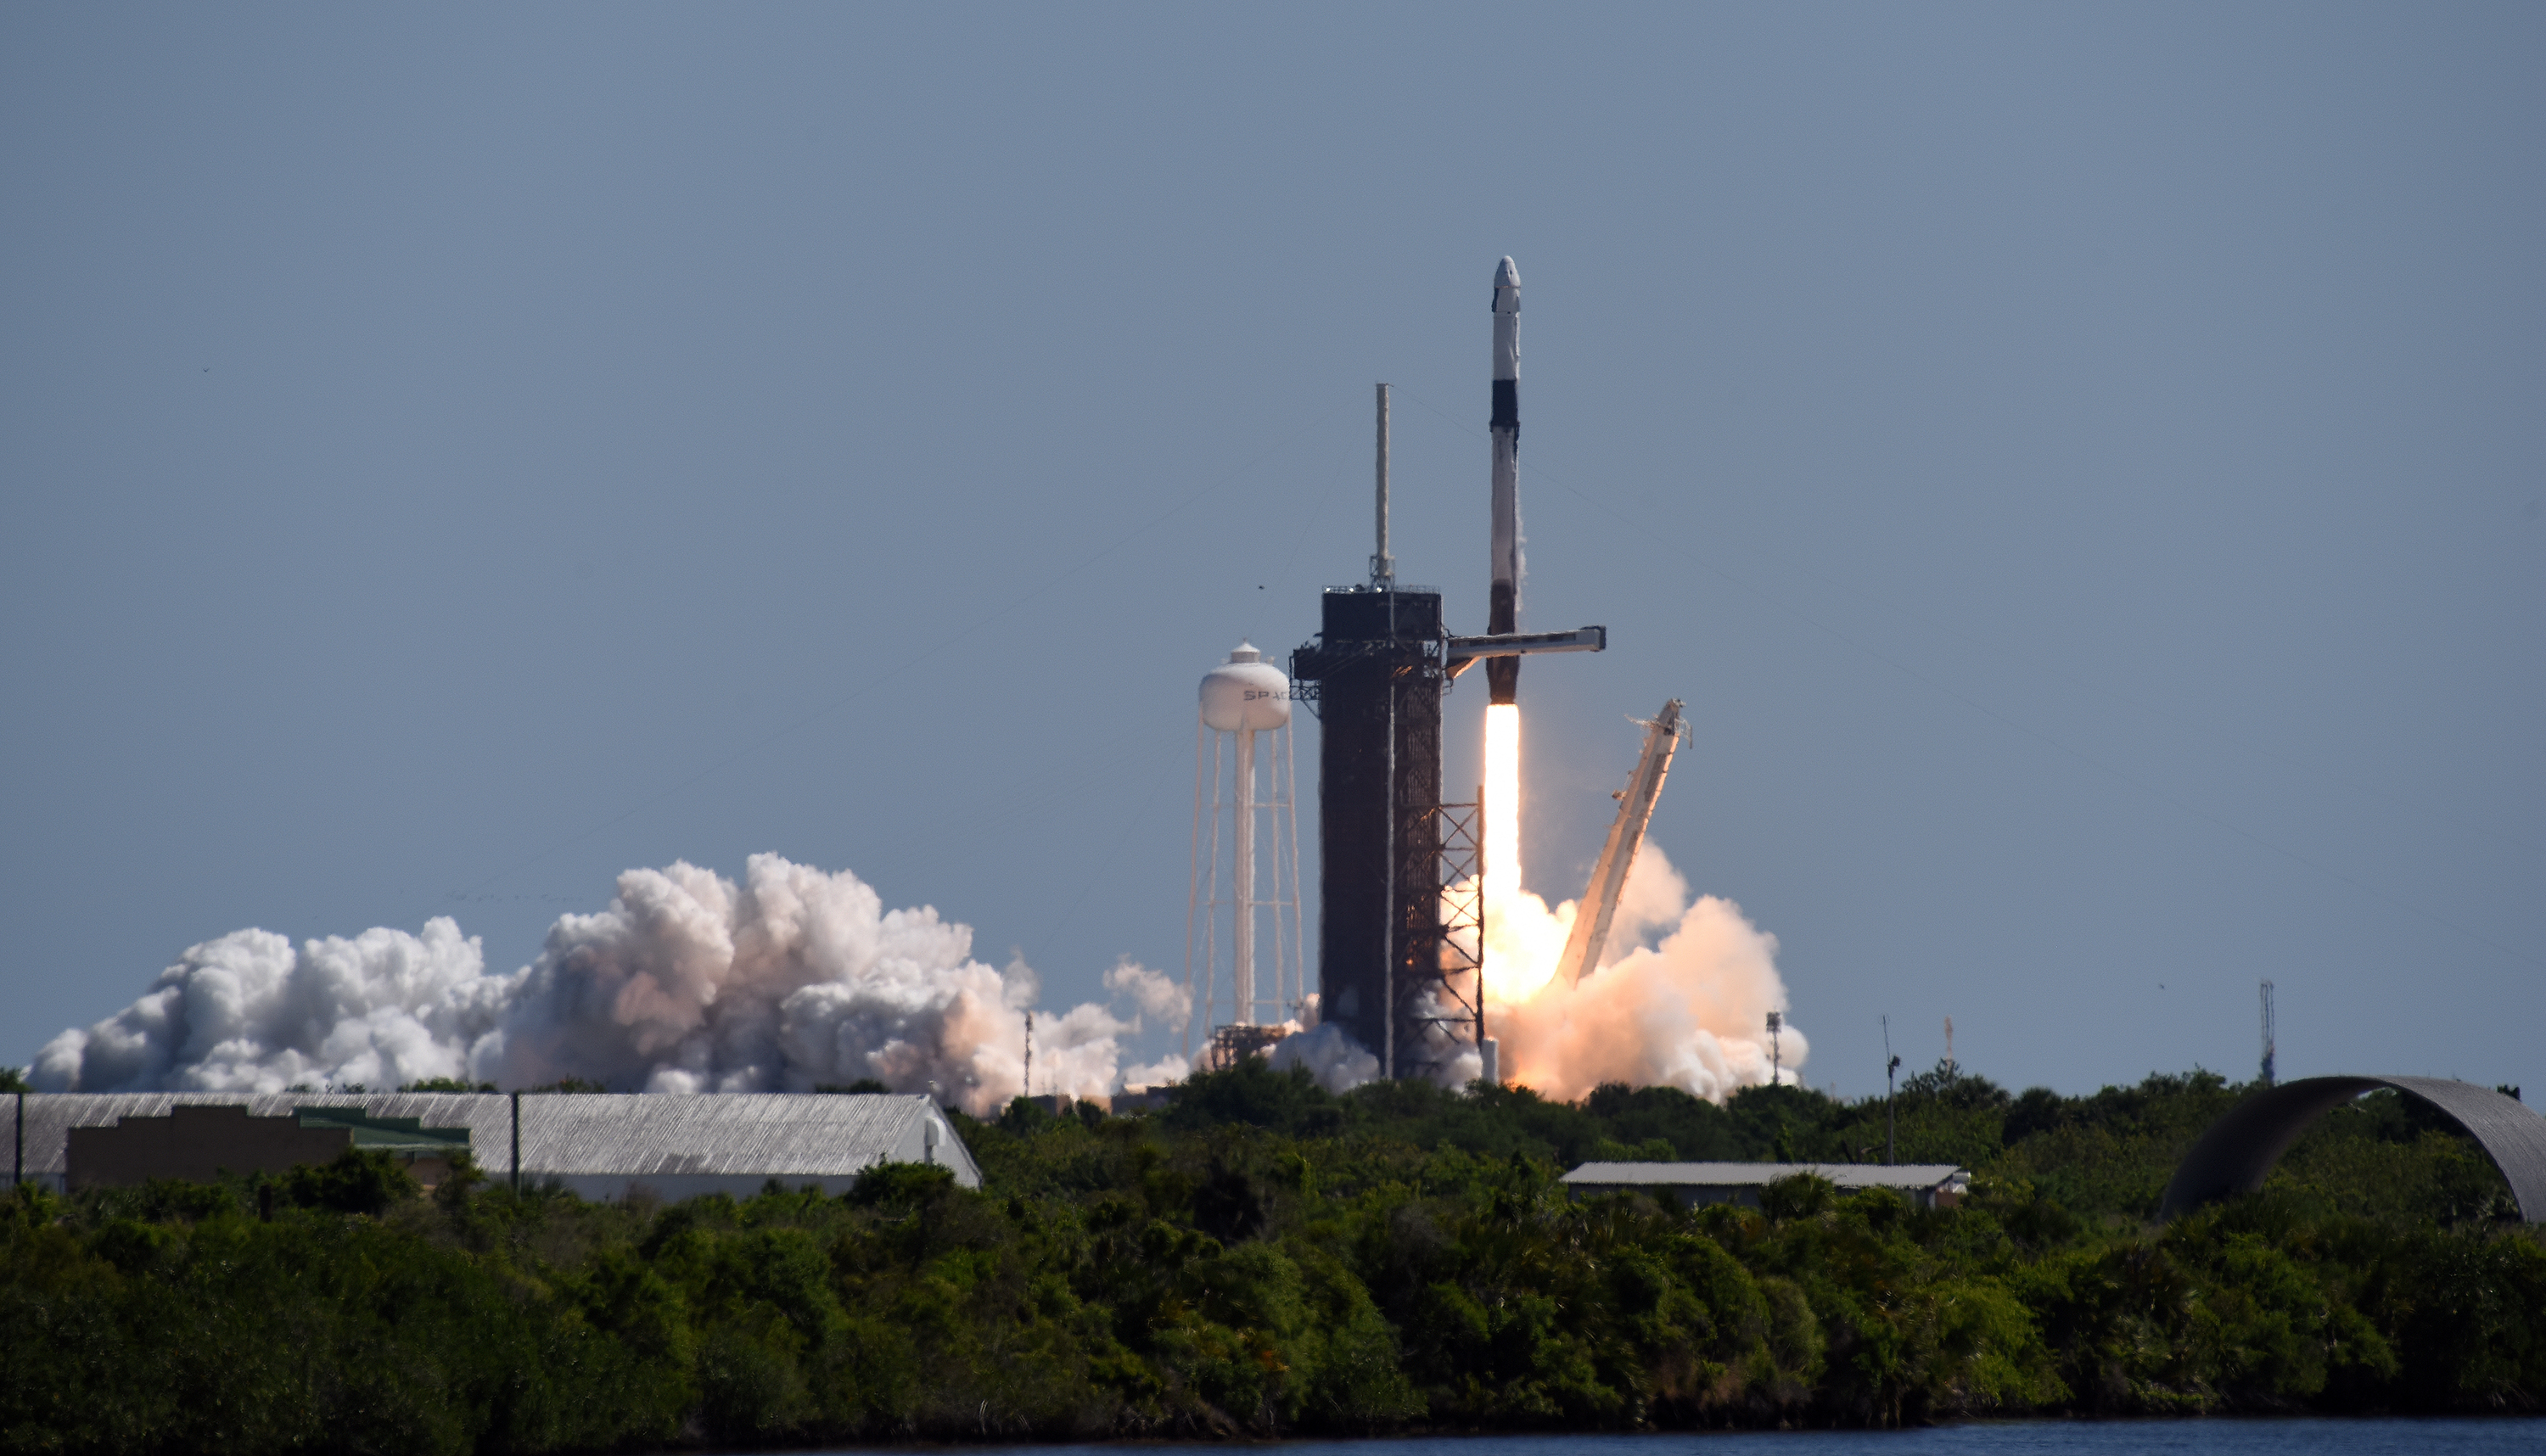 A SpaceX Falcon 9 rocket lifts off from launch complex 39A carrying the Crew Dragon spacecraft on a commercial mission managed by Axion Space at  Kennedy Space Center April 8, 2022 in Cape Canaveral, Florida. (Photo by Red Huber—Getty Images)